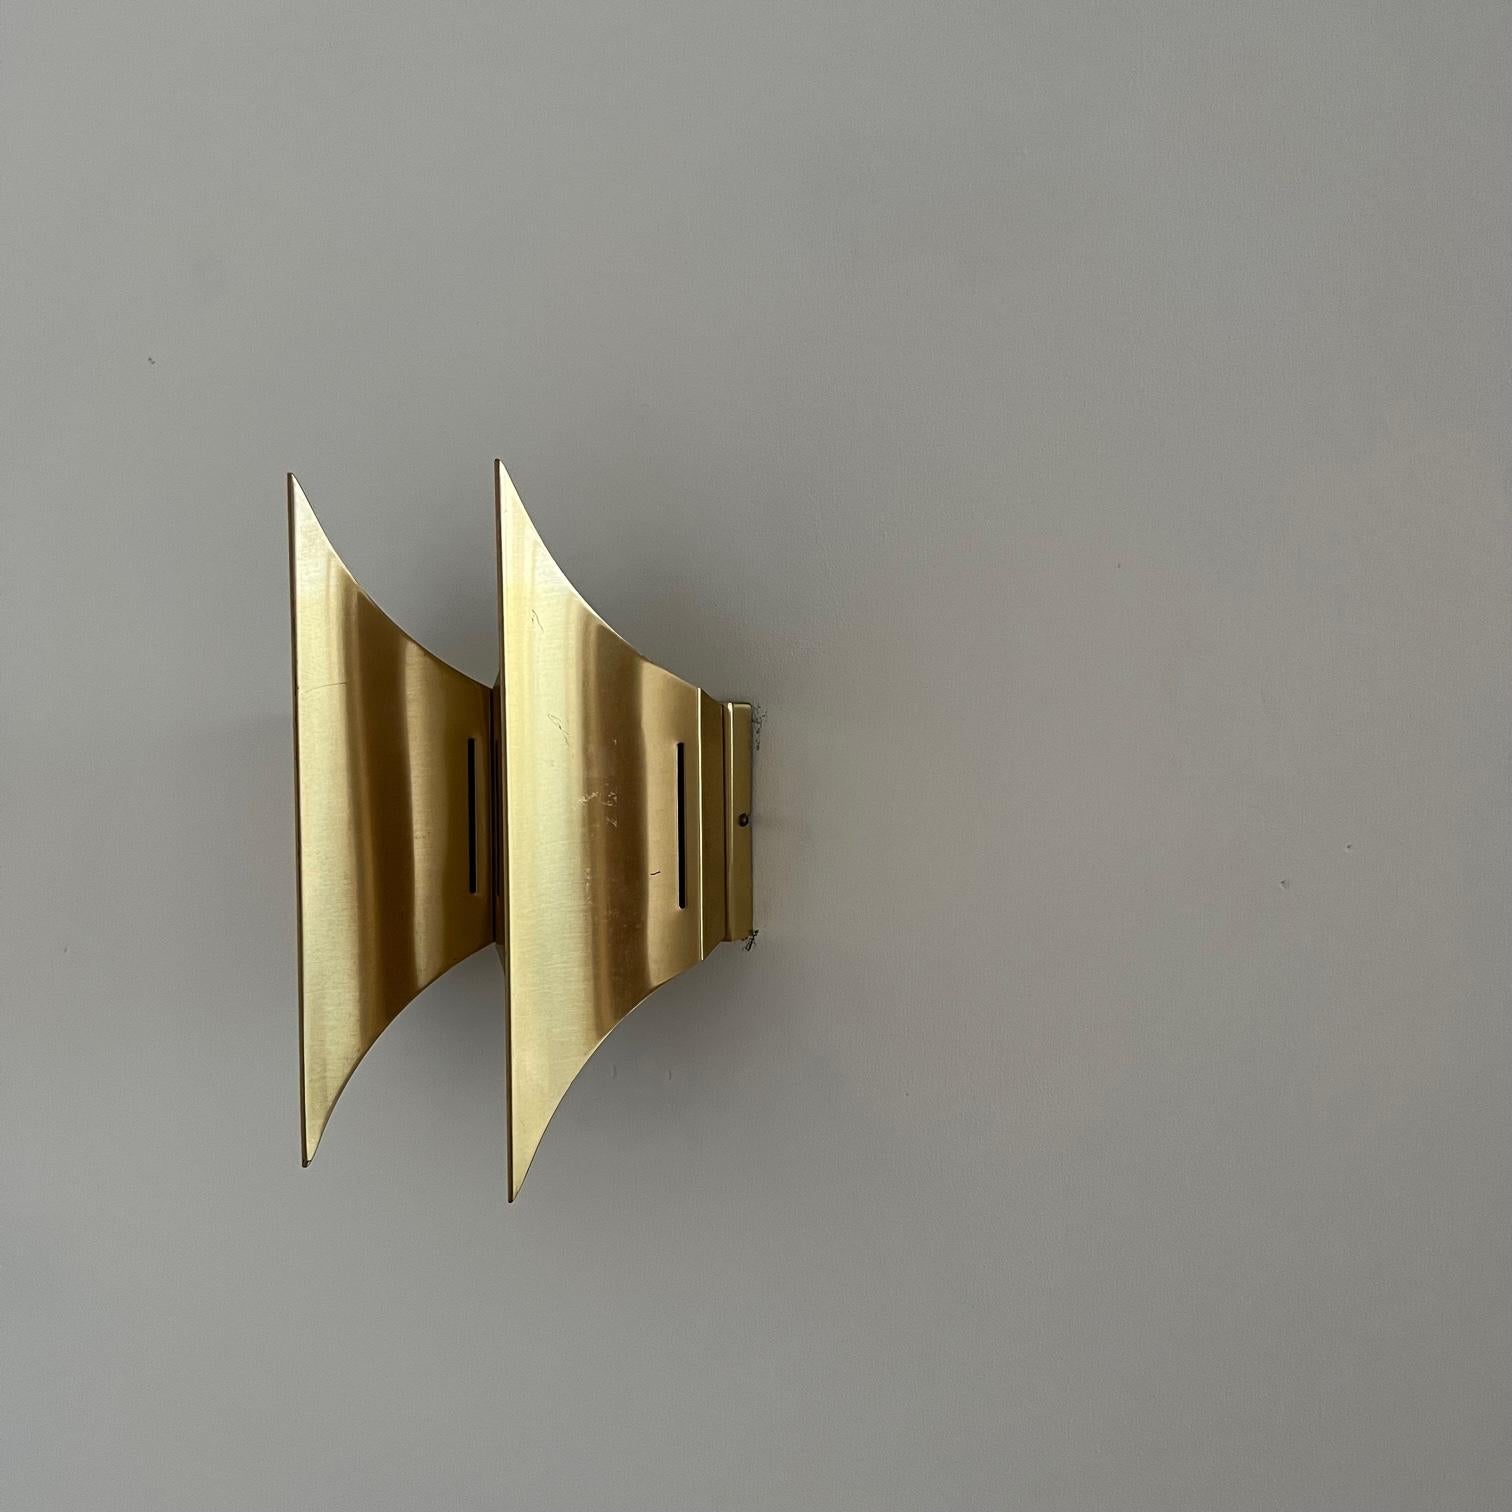 Brass wall lights by Bent Karlby for Lyfa.

Gothic II model.

Denmark, c1960s.

Three available at the time of listing.

PRICED AND SOLD INDIVIDUALLY. 

Re-wired and PAT tested.

Good vintage condition generally, one has a slight bent to